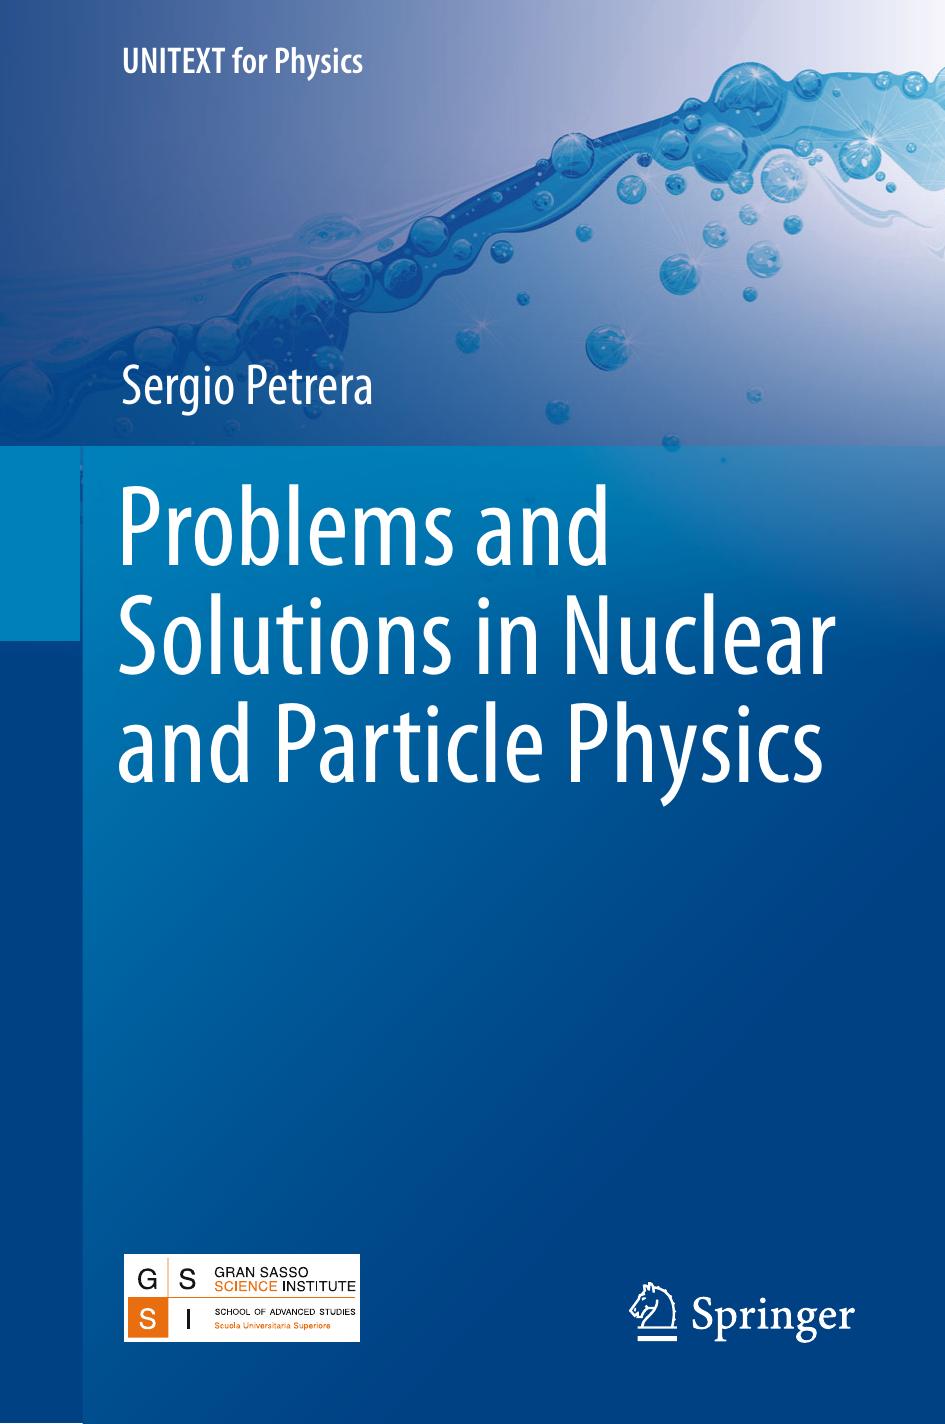 Problems and Solutions in Nuclear and Particle Physics by Sergio Petrera